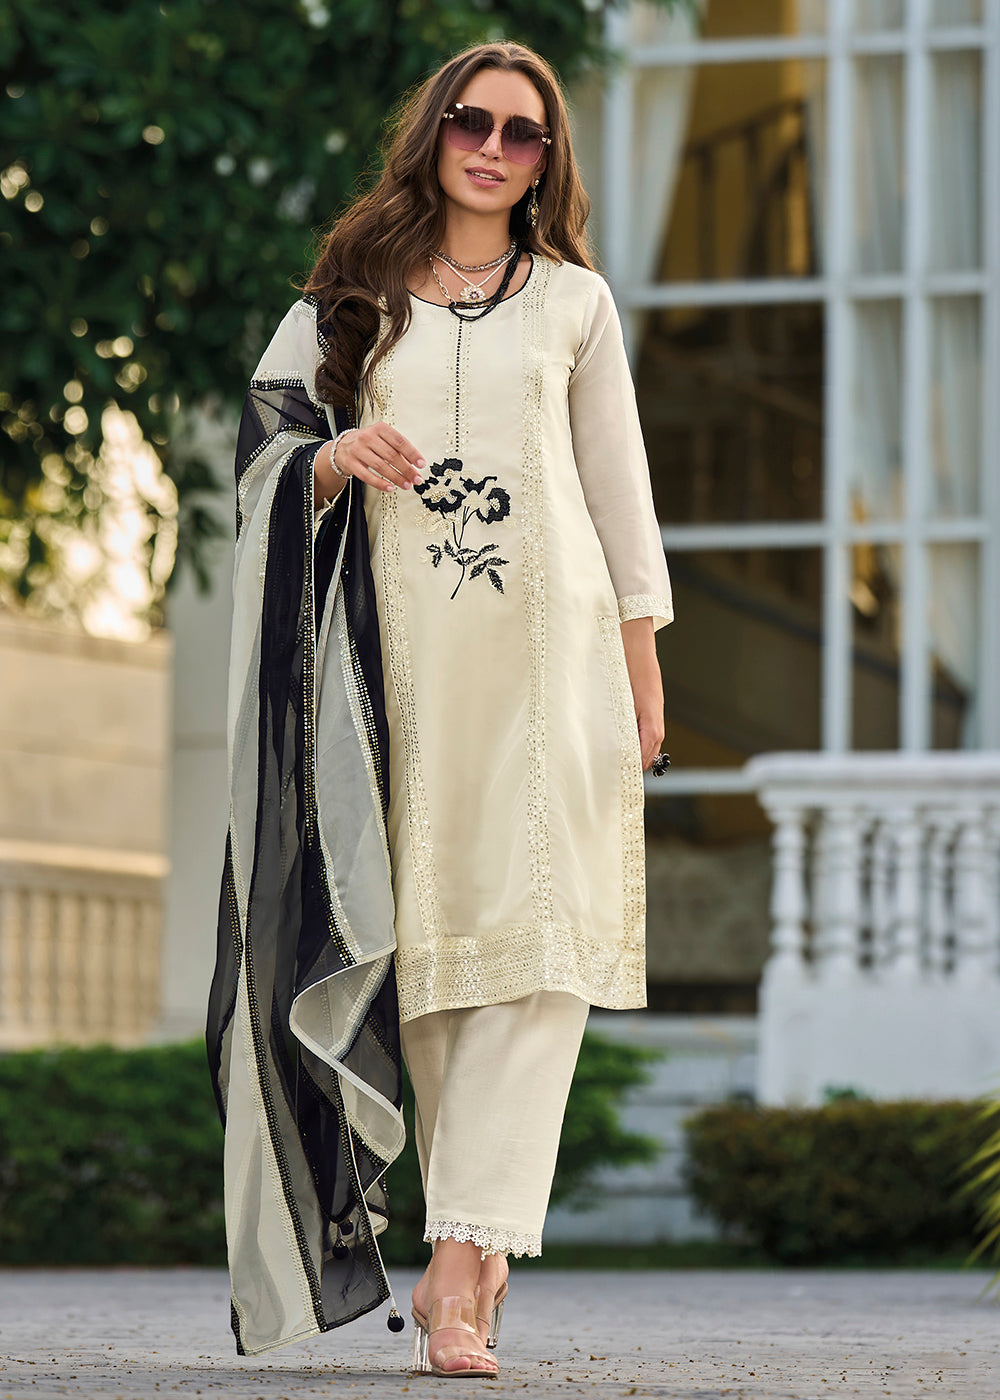 Buy Now Eid Style Off White Organza Pant Style Salwar Suit Online in USA, UK, Canada, Germany, Australia & Worldwide at Empress Clothing. 